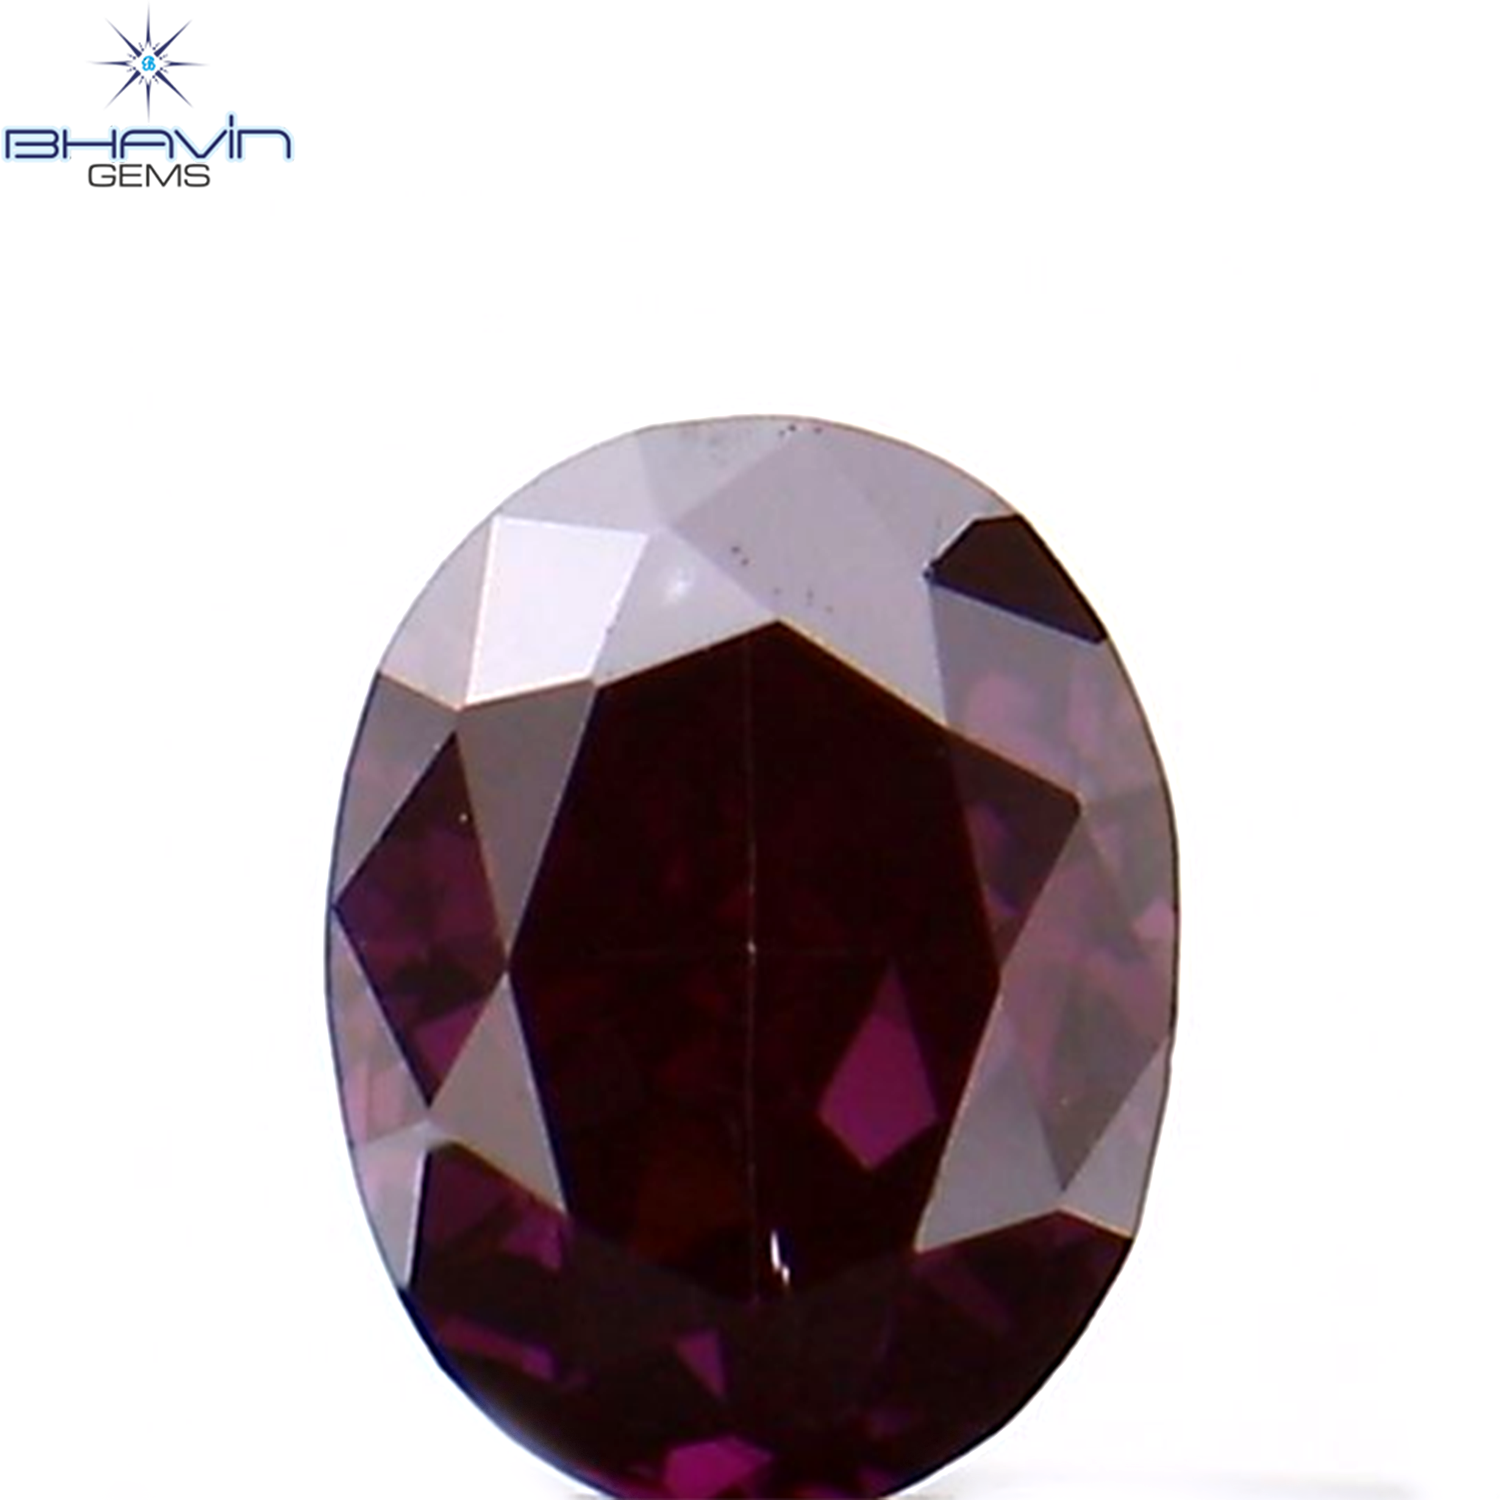 0.12 CT Oval Shape Natural Diamond Enhanced Pink Color VS1 Clarity (3.40 MM)